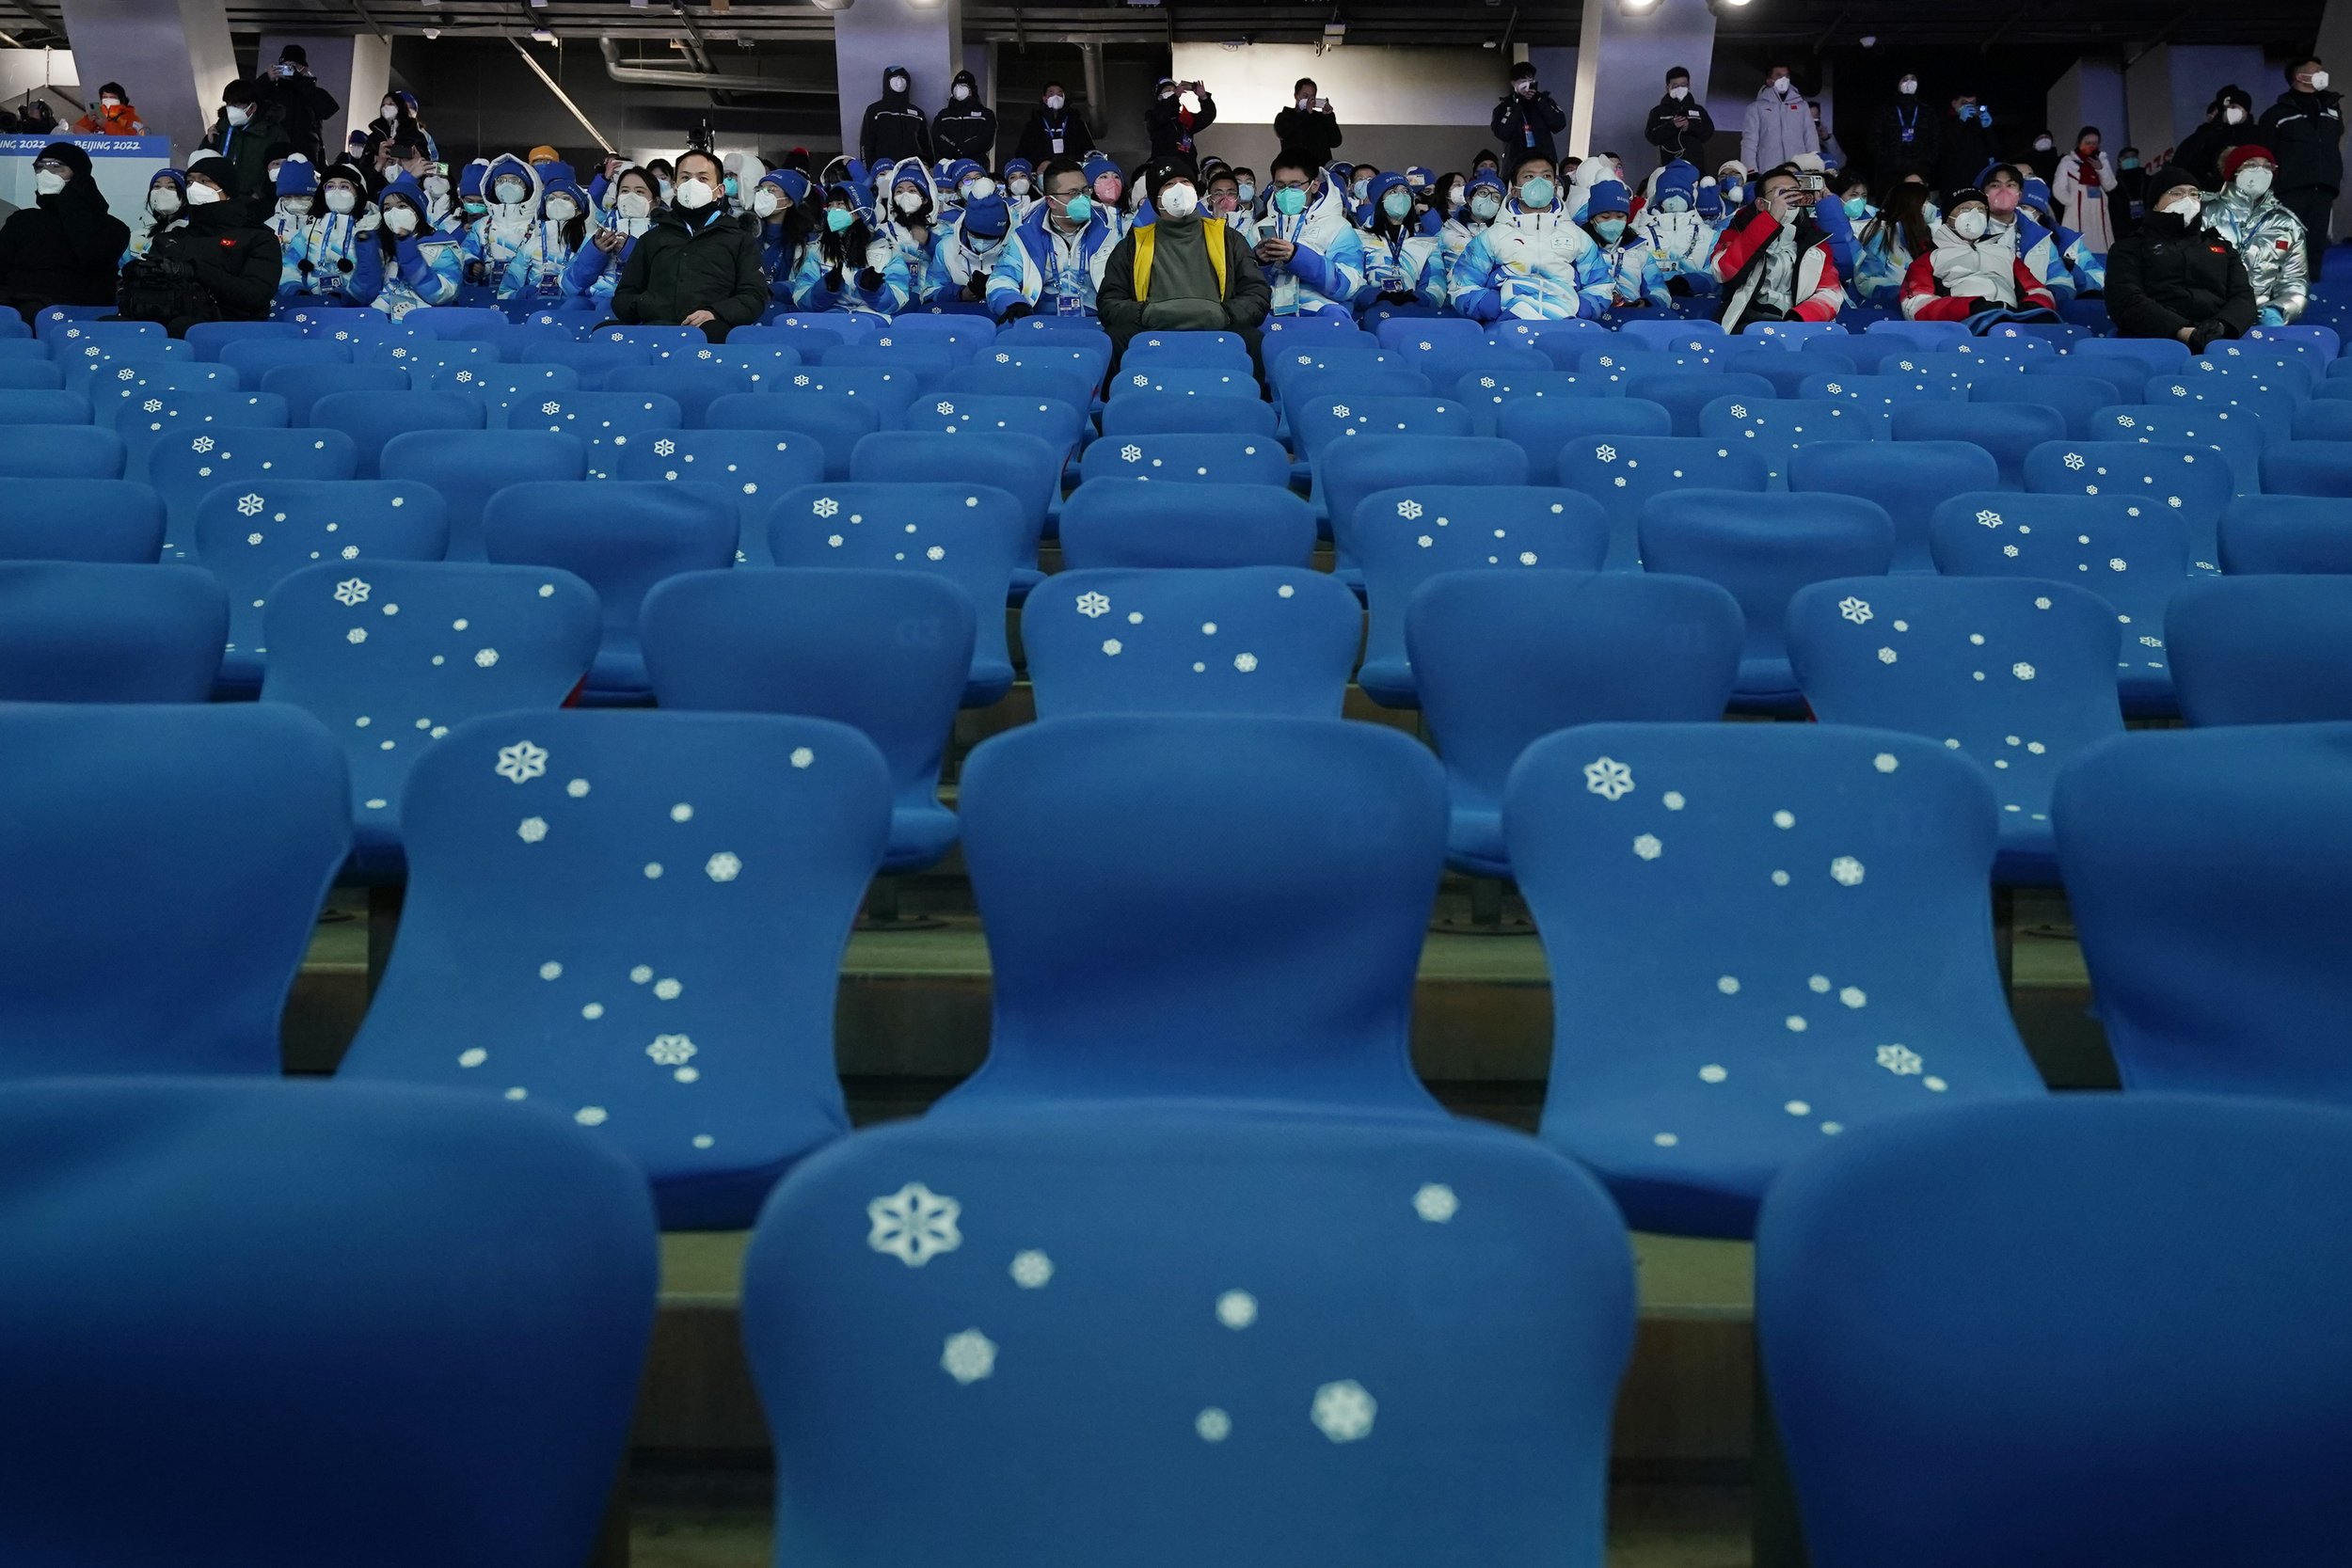  Spectators watch the pre-show ahead of the opening ceremony of the 2022 Winter Olympics, Friday, Feb. 4, 2022, in Beijing. (AP Photo/Jae C. Hong) 